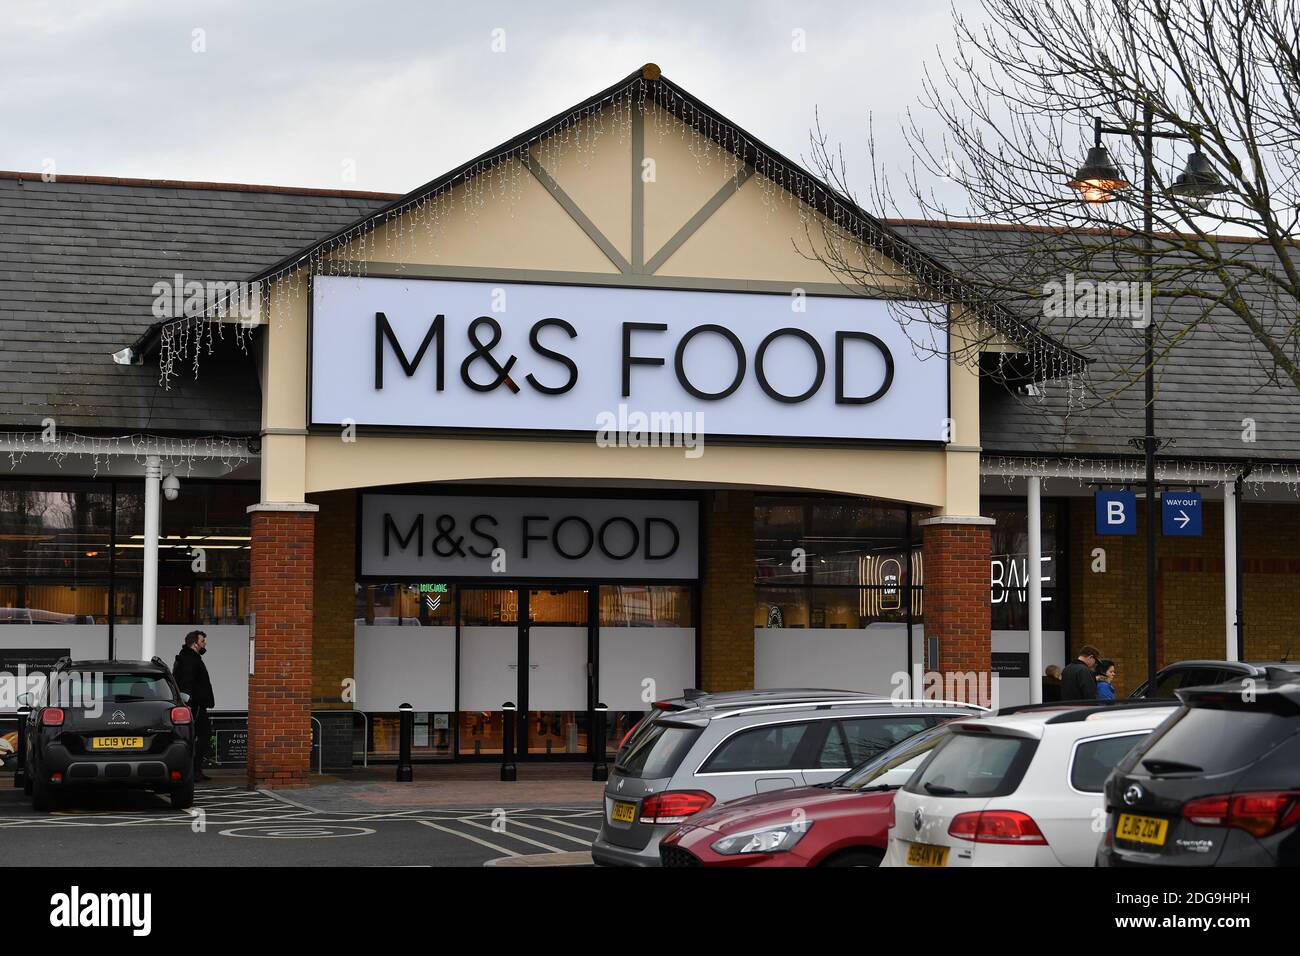 Marks & Spencer M&S Food Shop in Two Rivers, Staines, Surrey, Thursday 2nd December 2020. Stock Photo